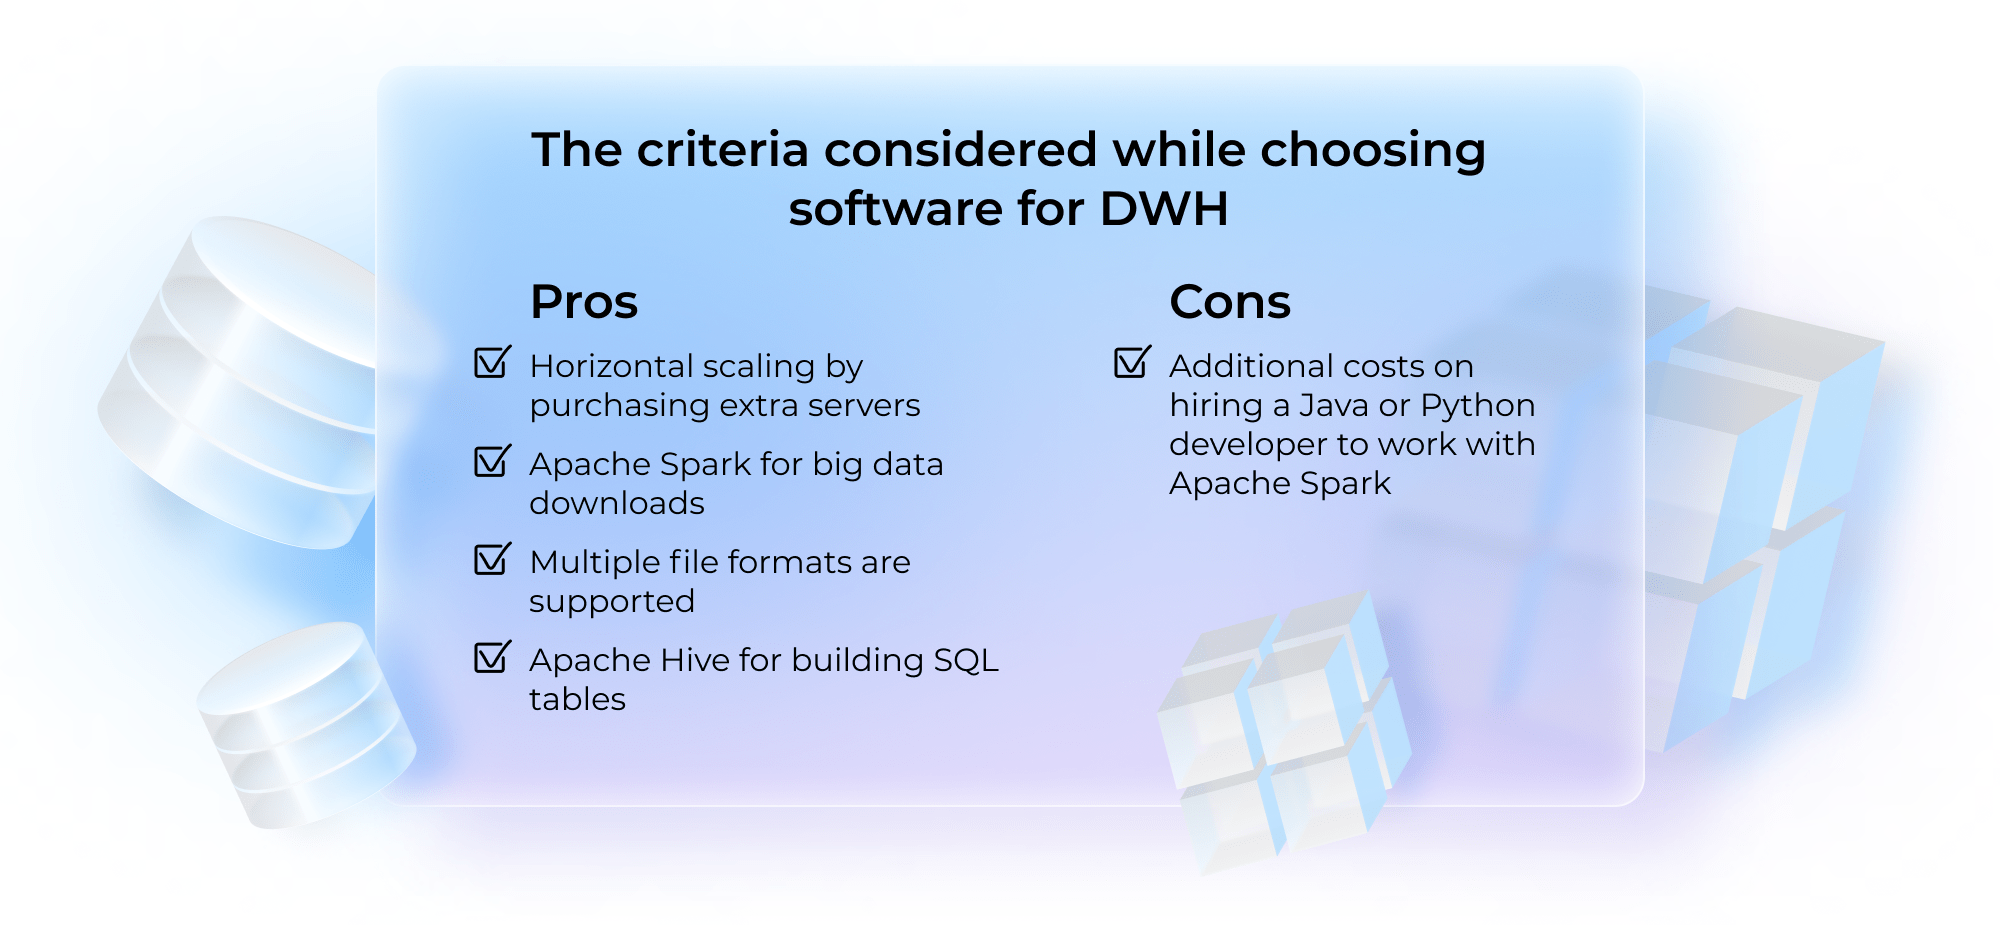 The criteria considered while choosing software for DWH